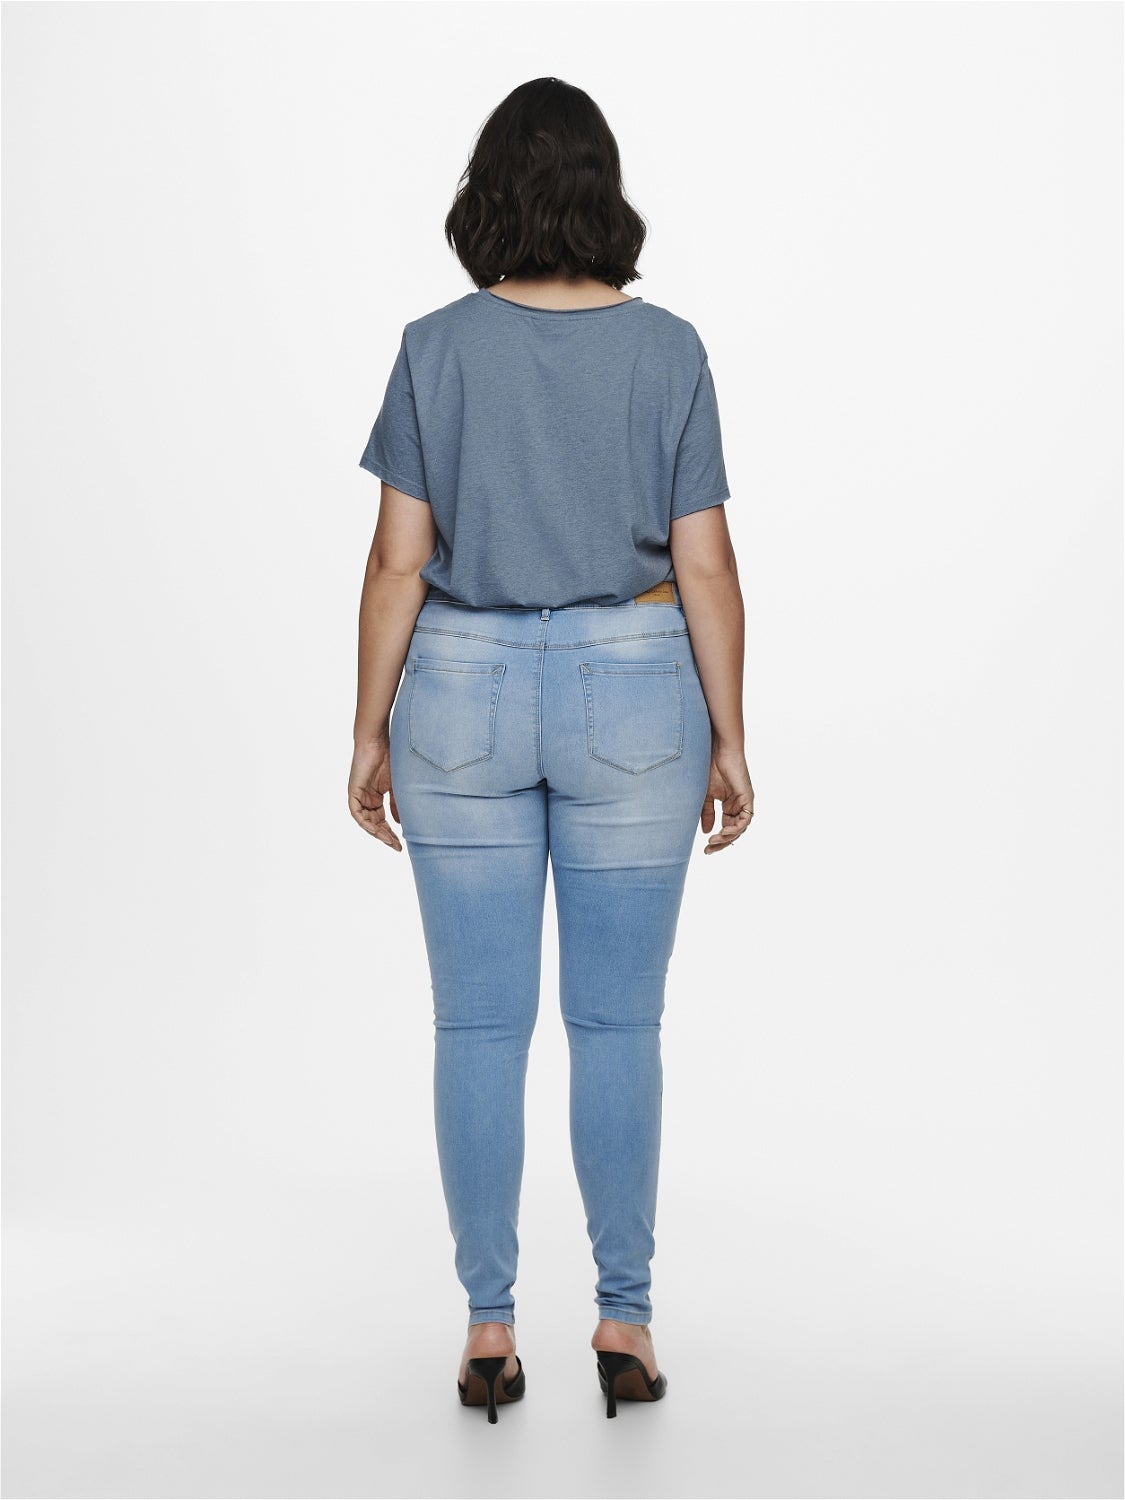 Curvy CarAugusta hw Light jeans fit Blue | ONLY® Skinny 